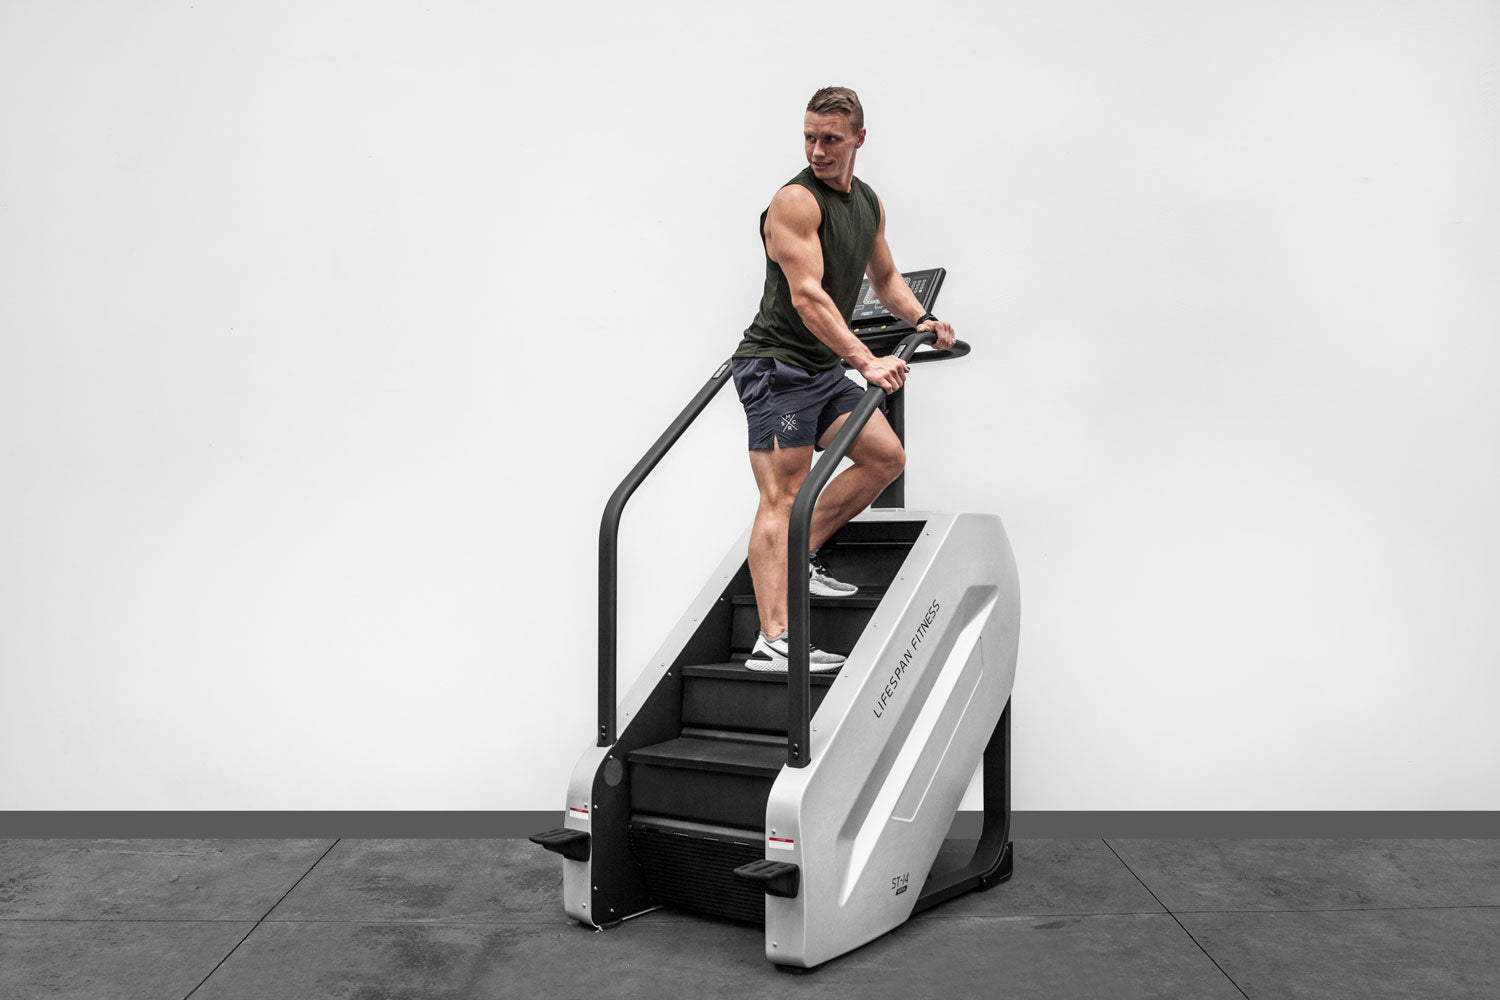 What does the Stair Climber work?